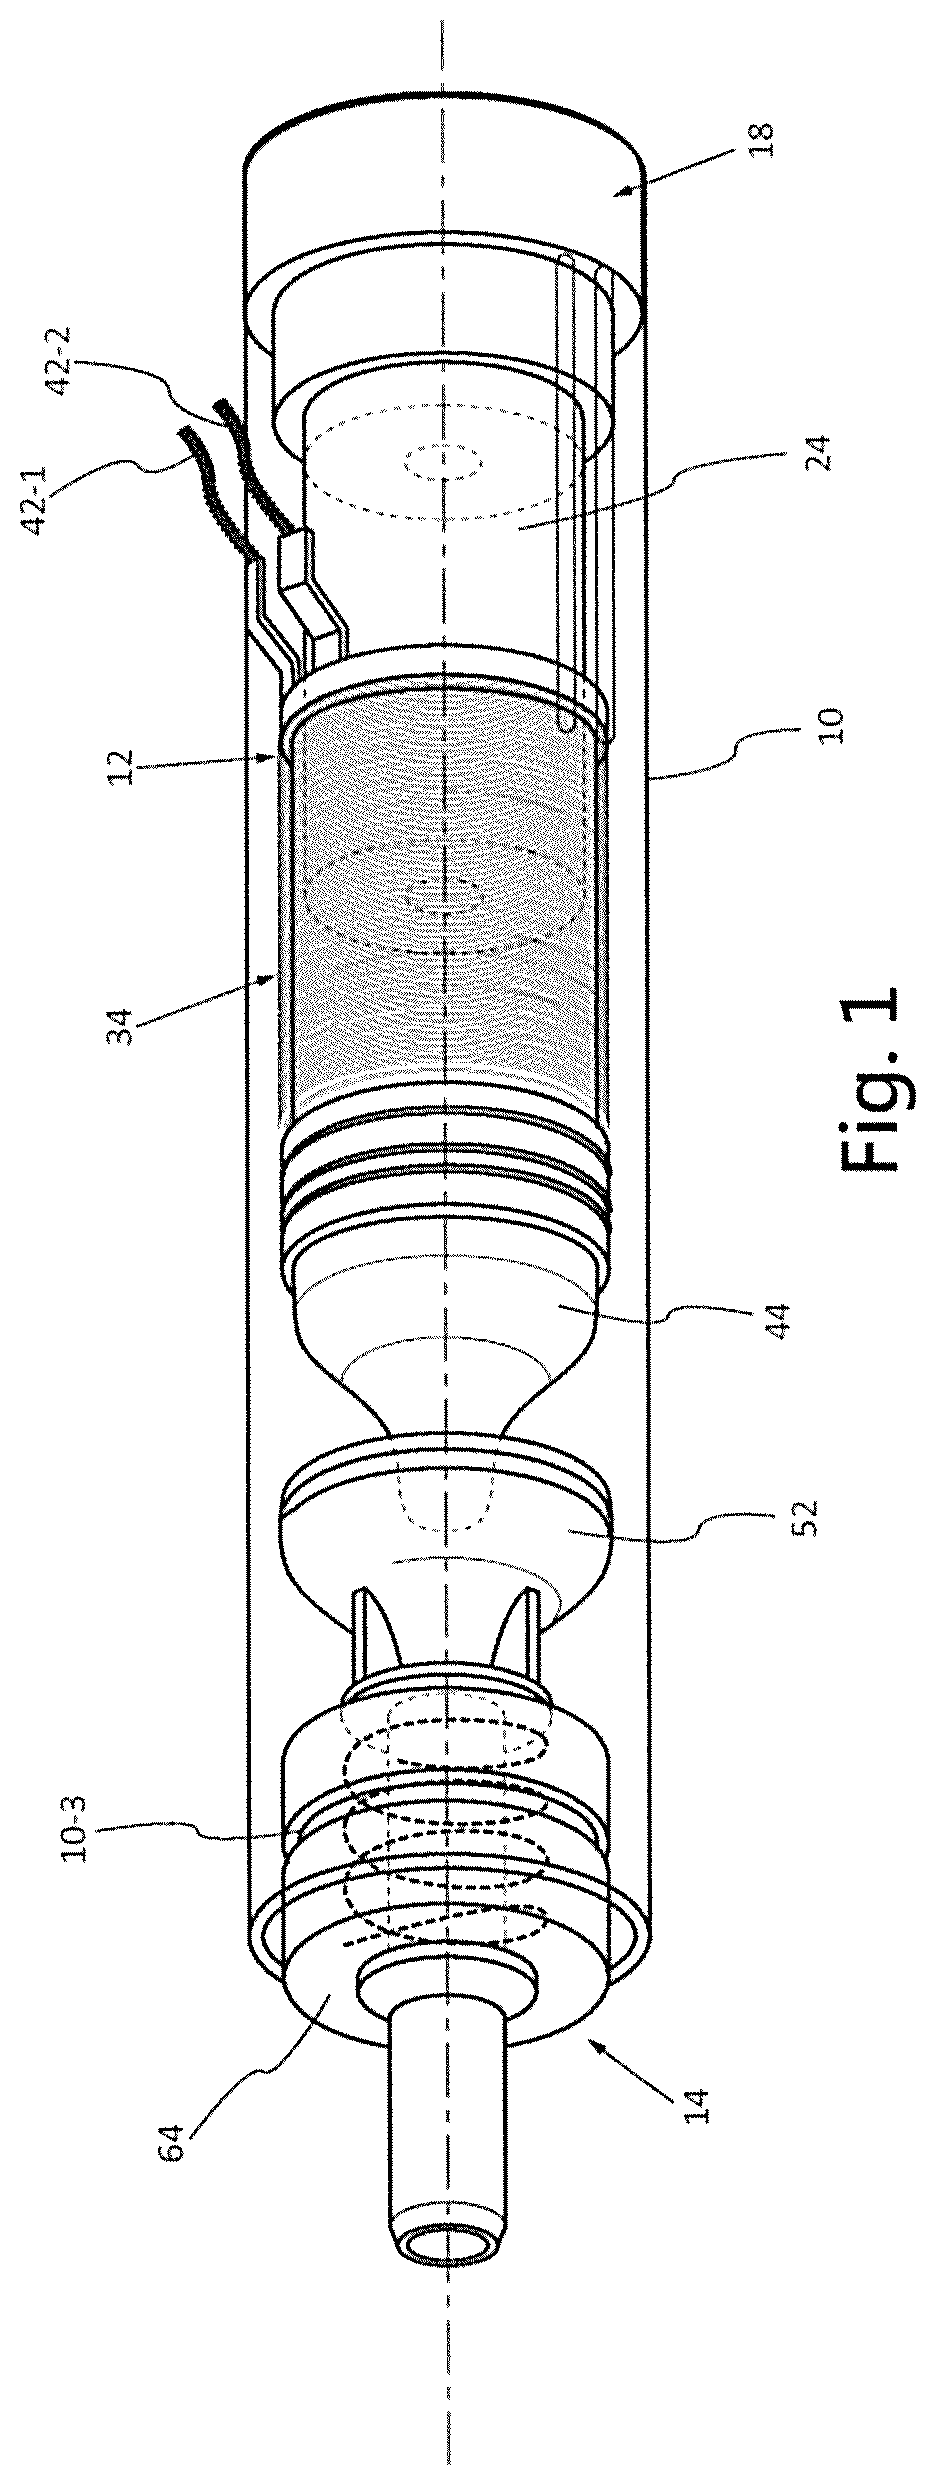 Device for projecting a projectile by compressed air using electromagnetic piston compression, associated control method